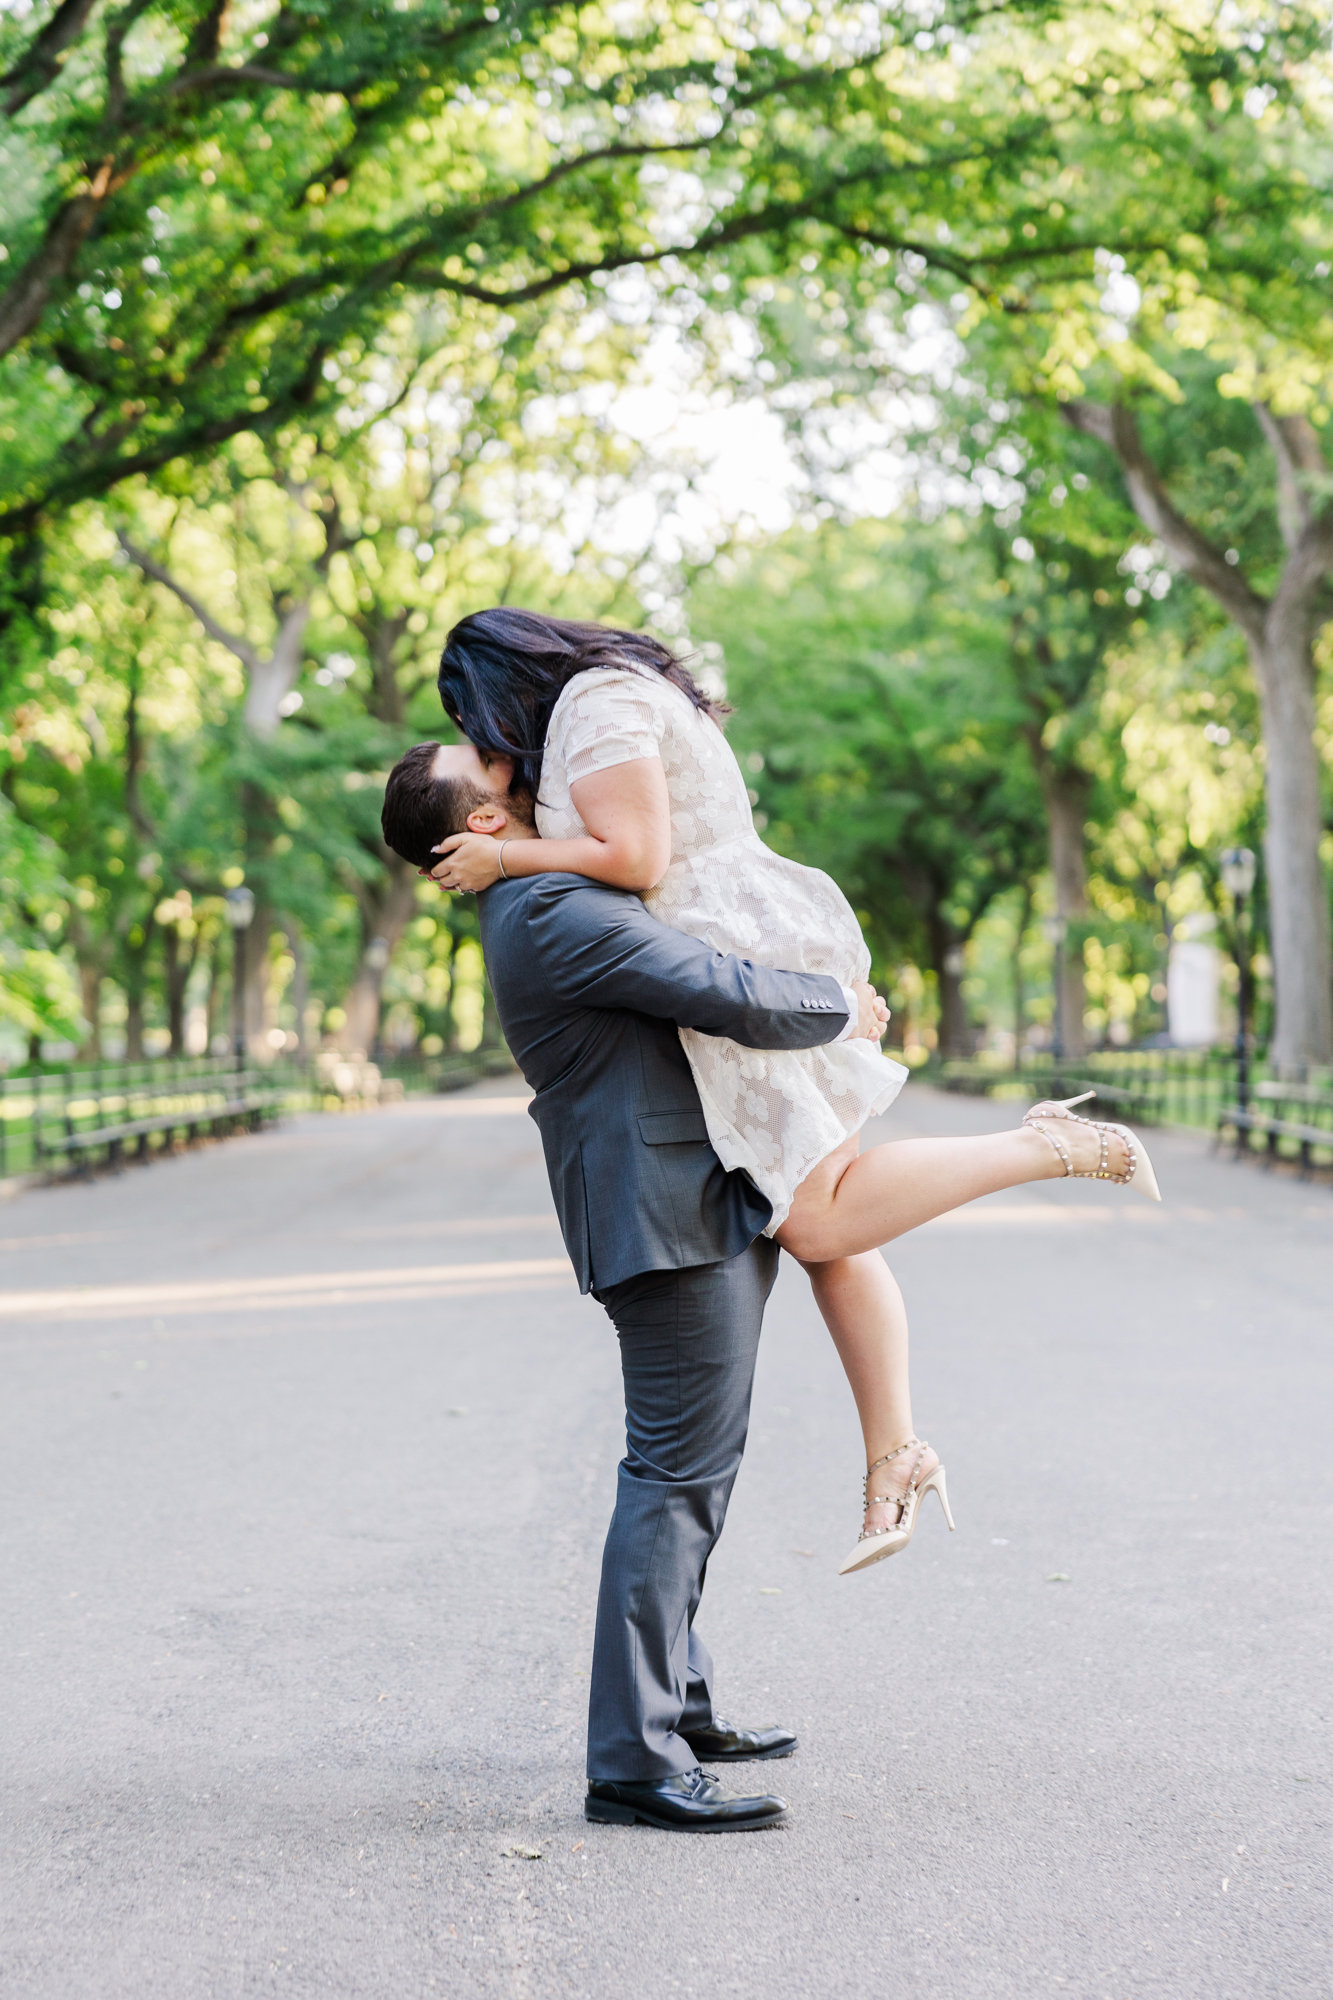 Sentimental Pose Ideas for your Engagement Session